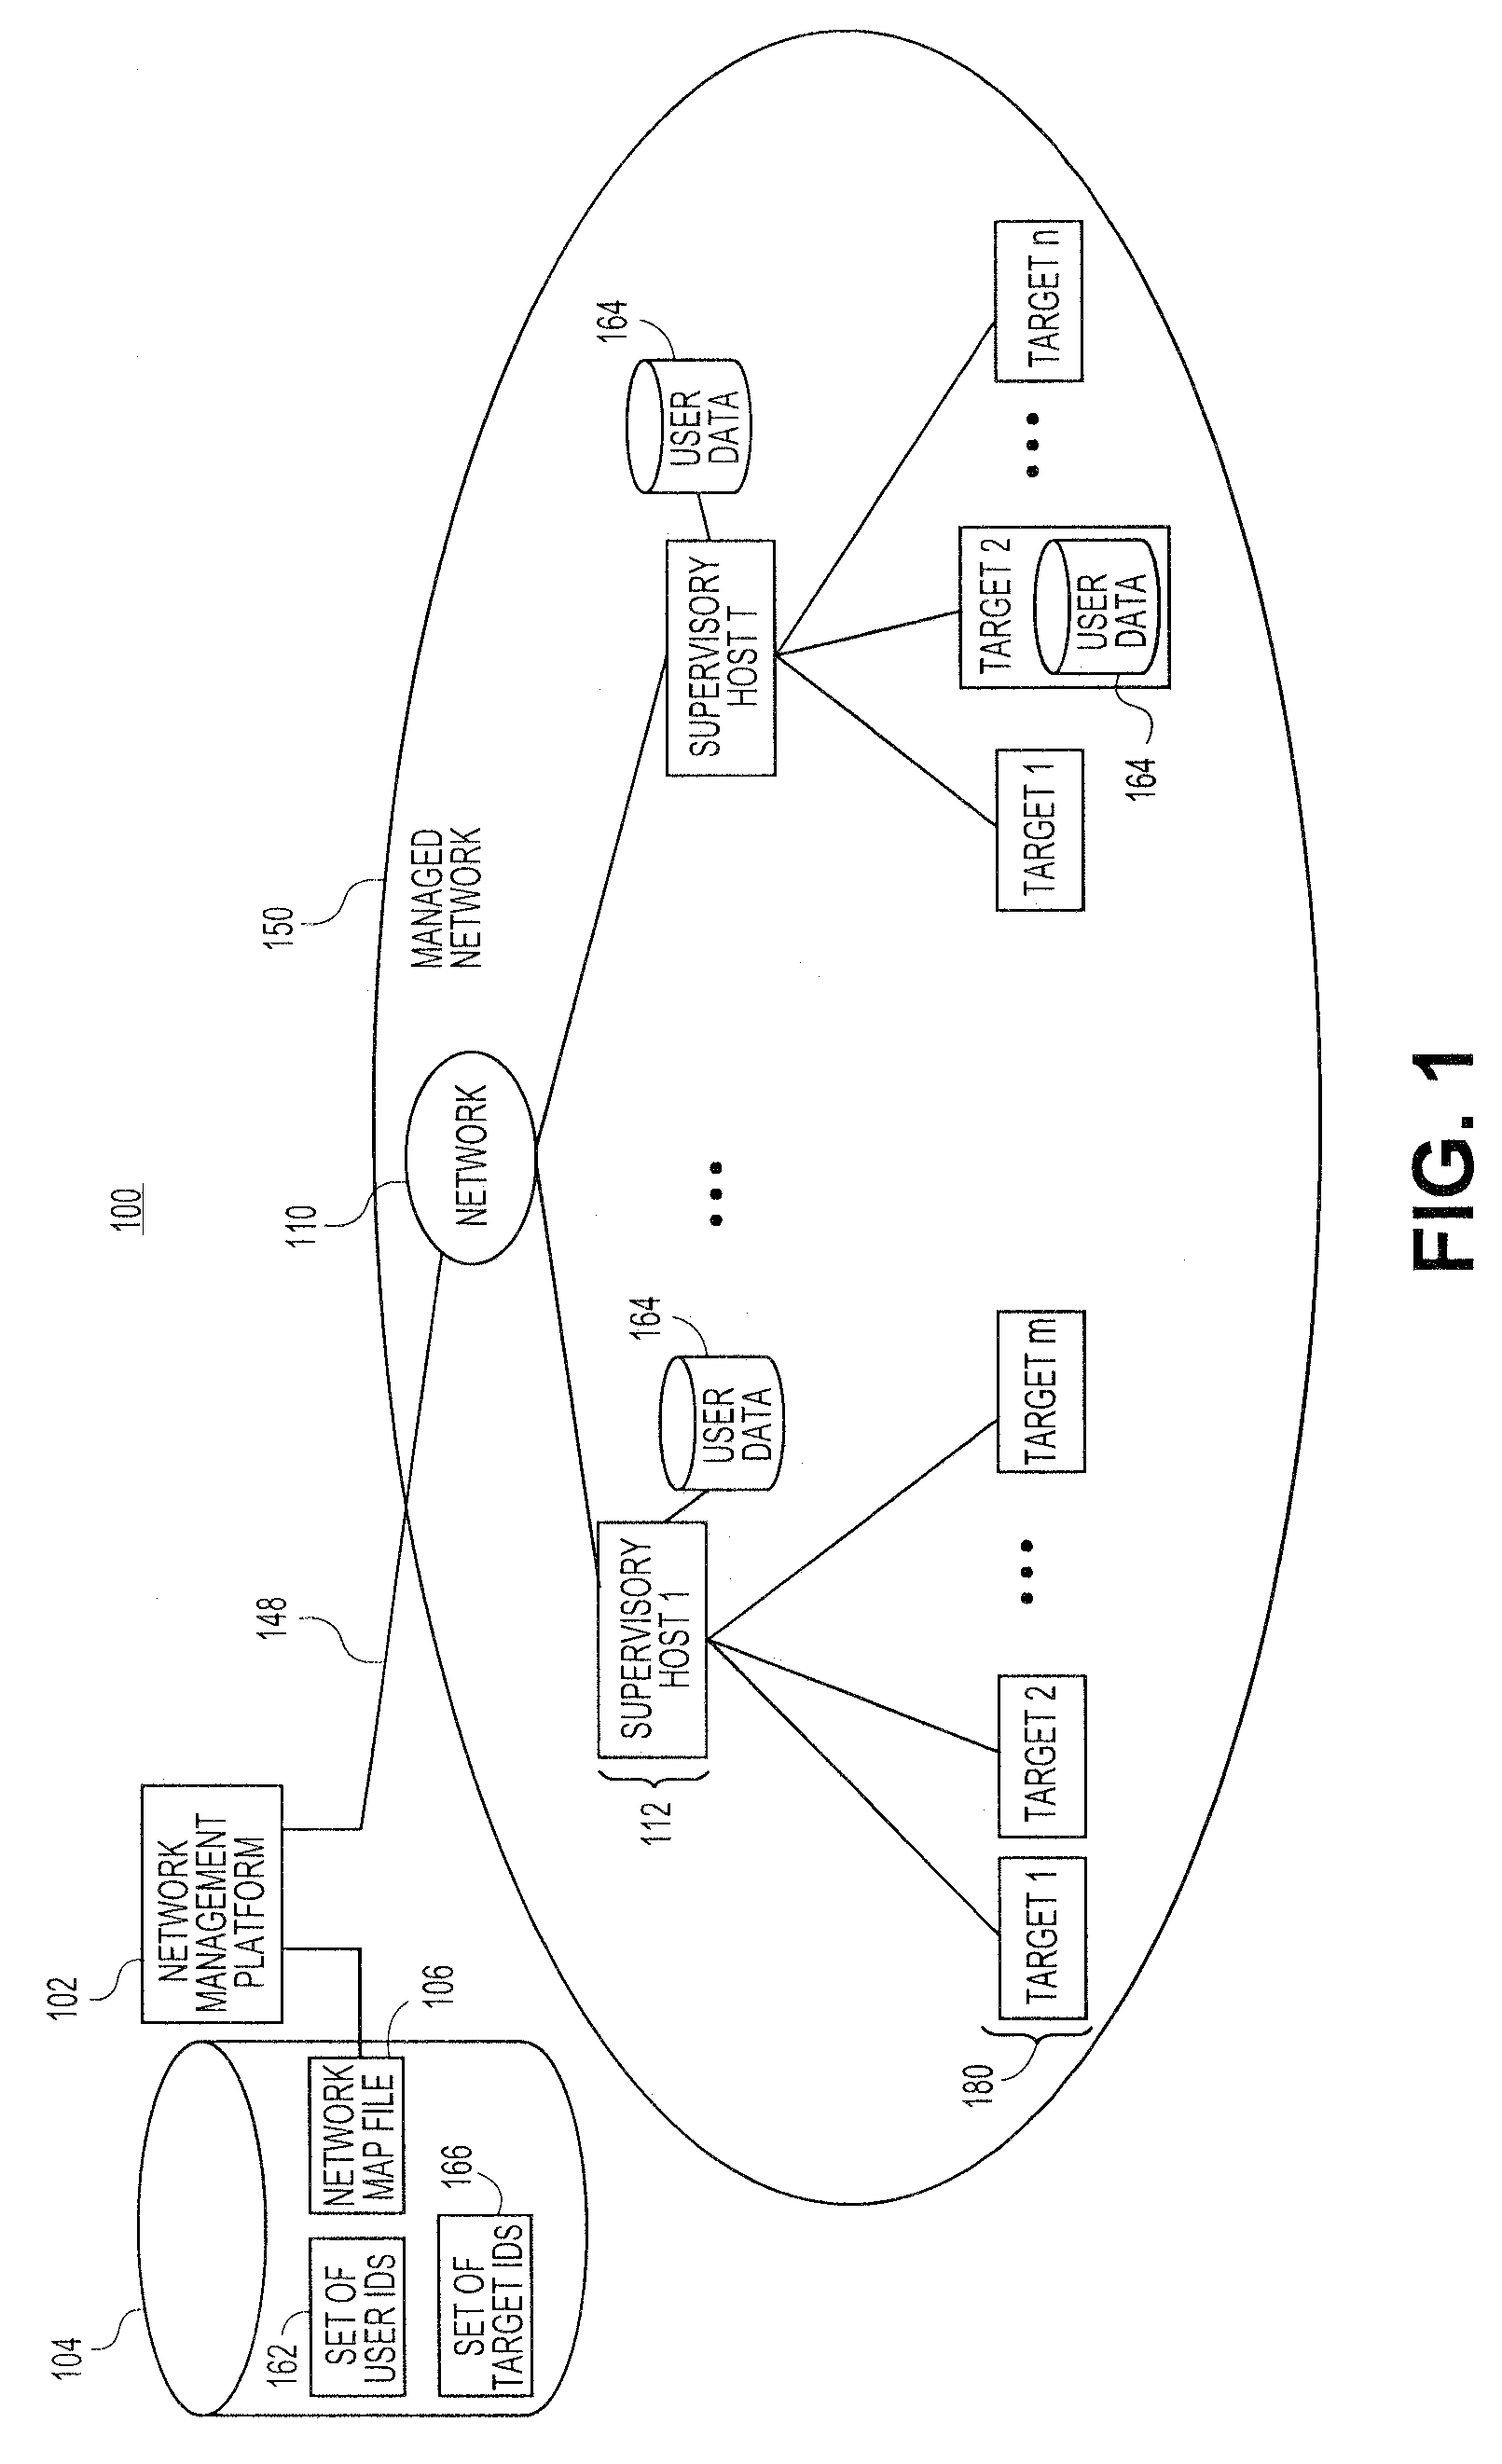 Systems and methods for interrogating diagnostic target using remotely loaded image